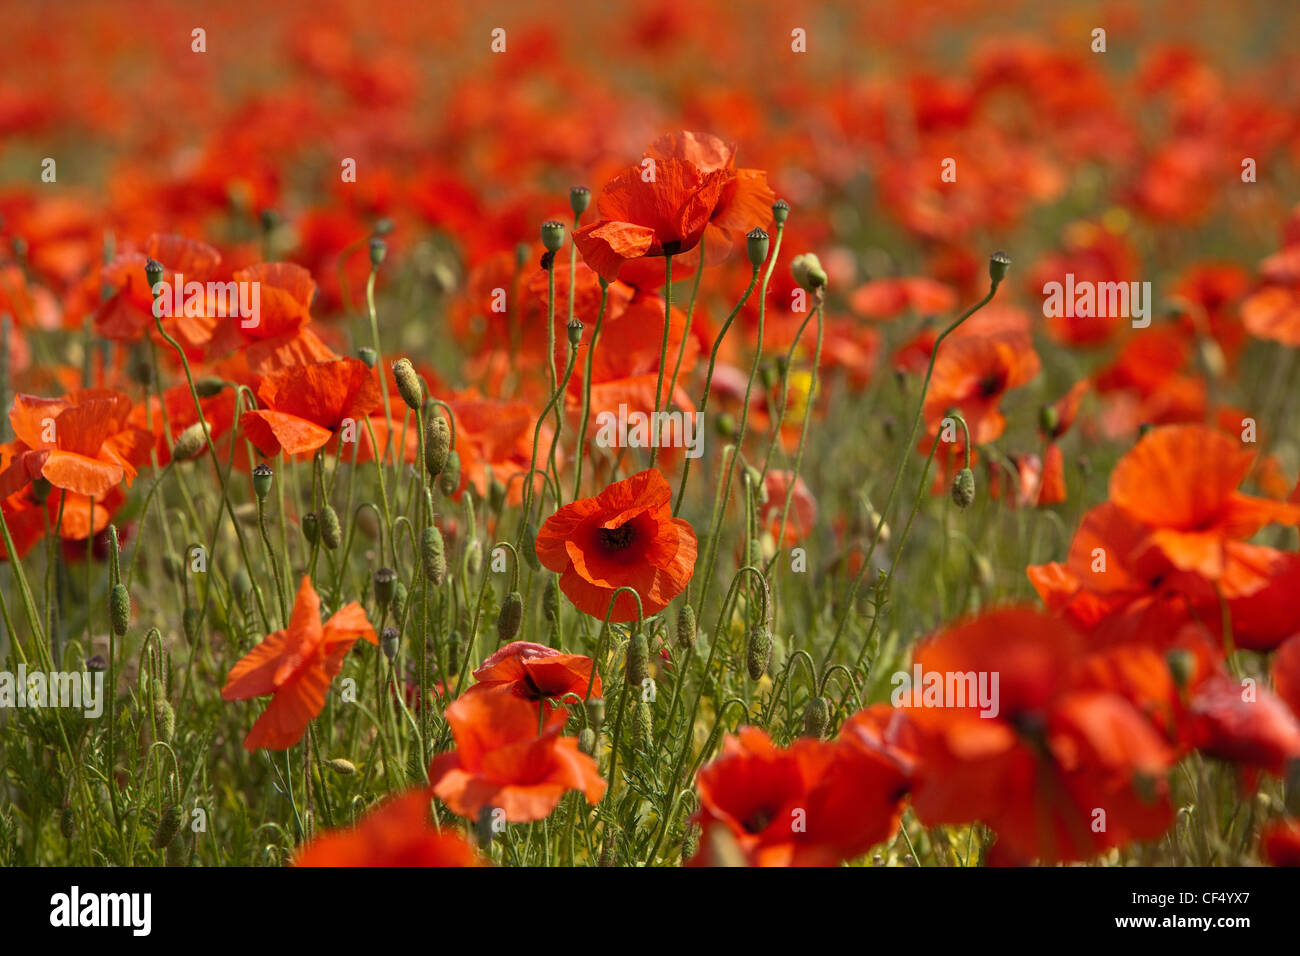 Wild poppies growing in a field near Hovingham in the Howardian Hills. Stock Photo